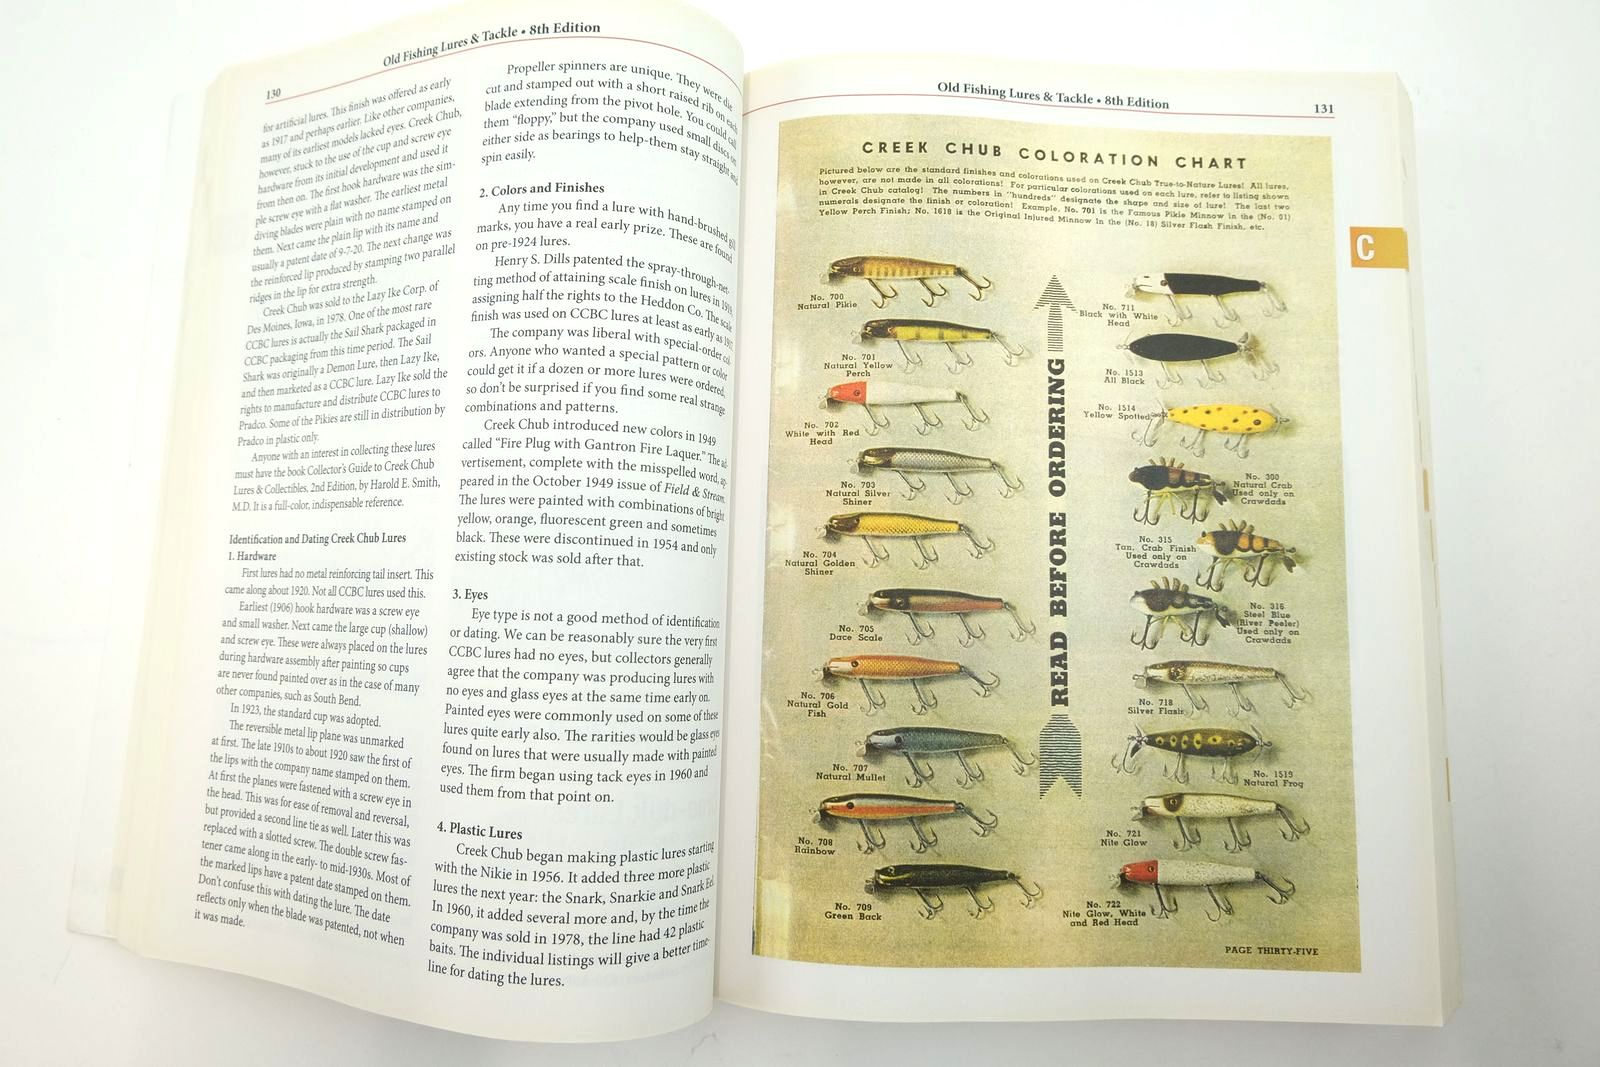 Old Fishing Lures and Tackle by Carl F. Luckey 4th Ed